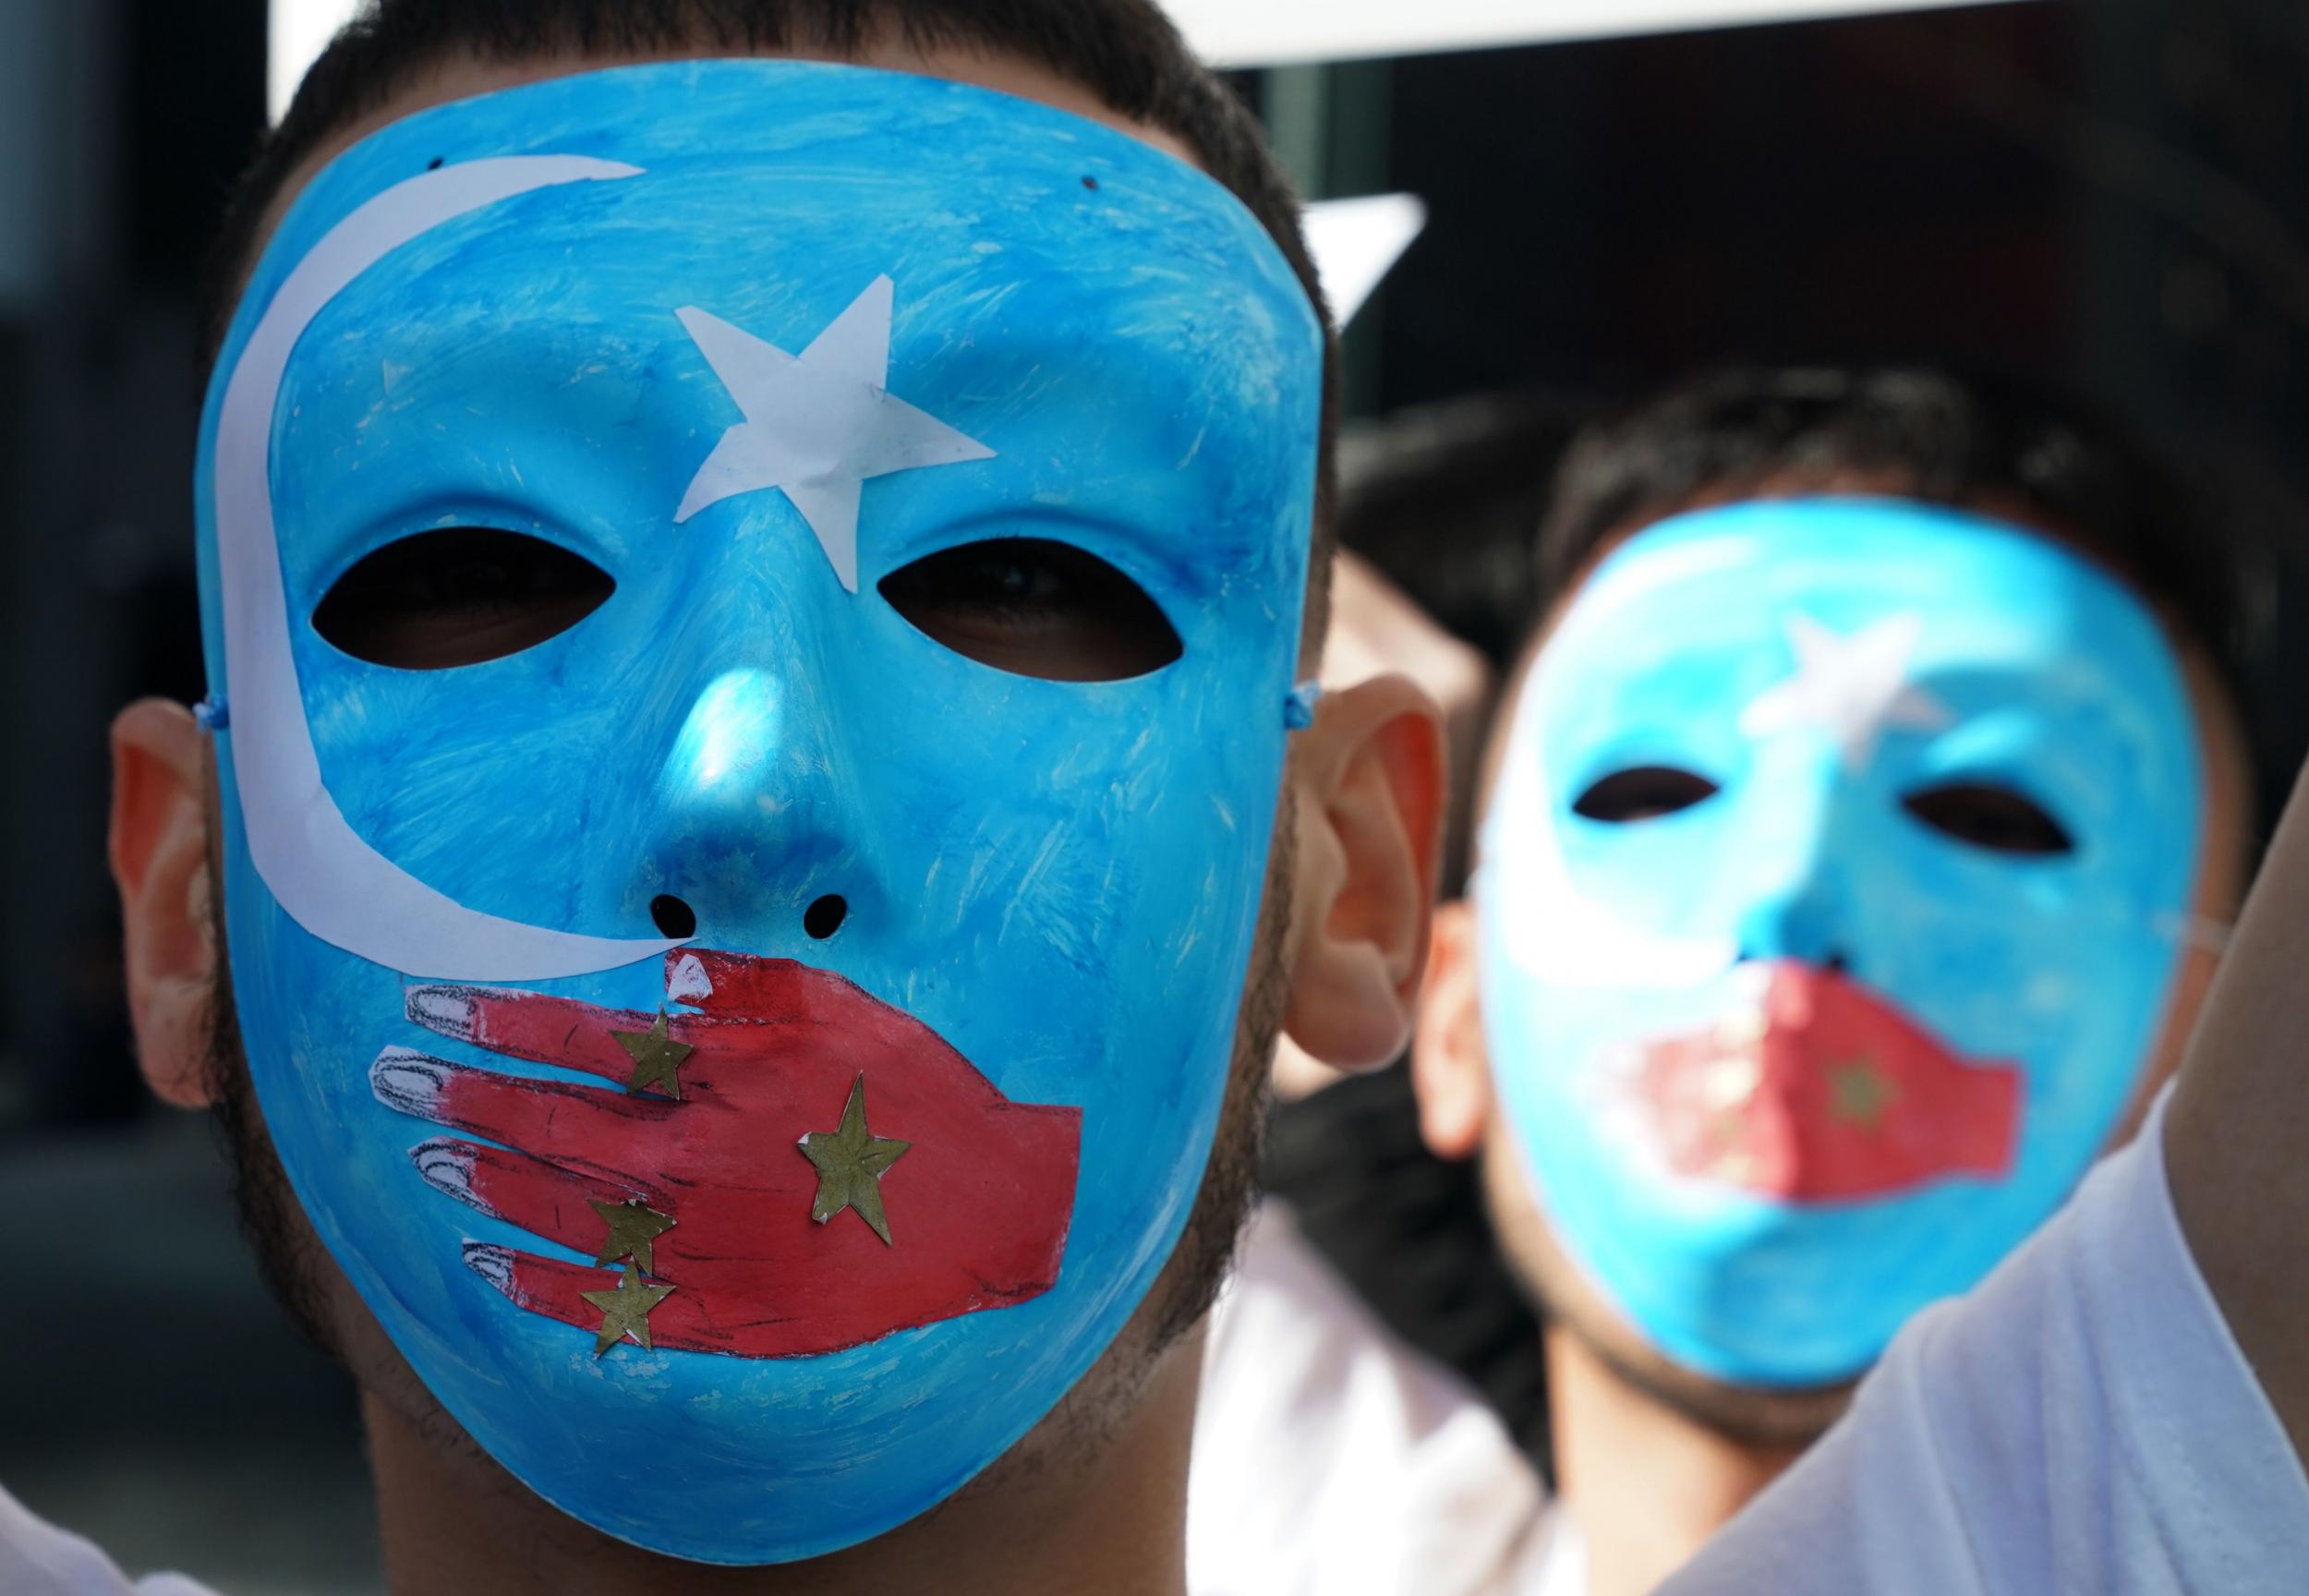 Pro-Uighur protesters outside the United Nations in New York